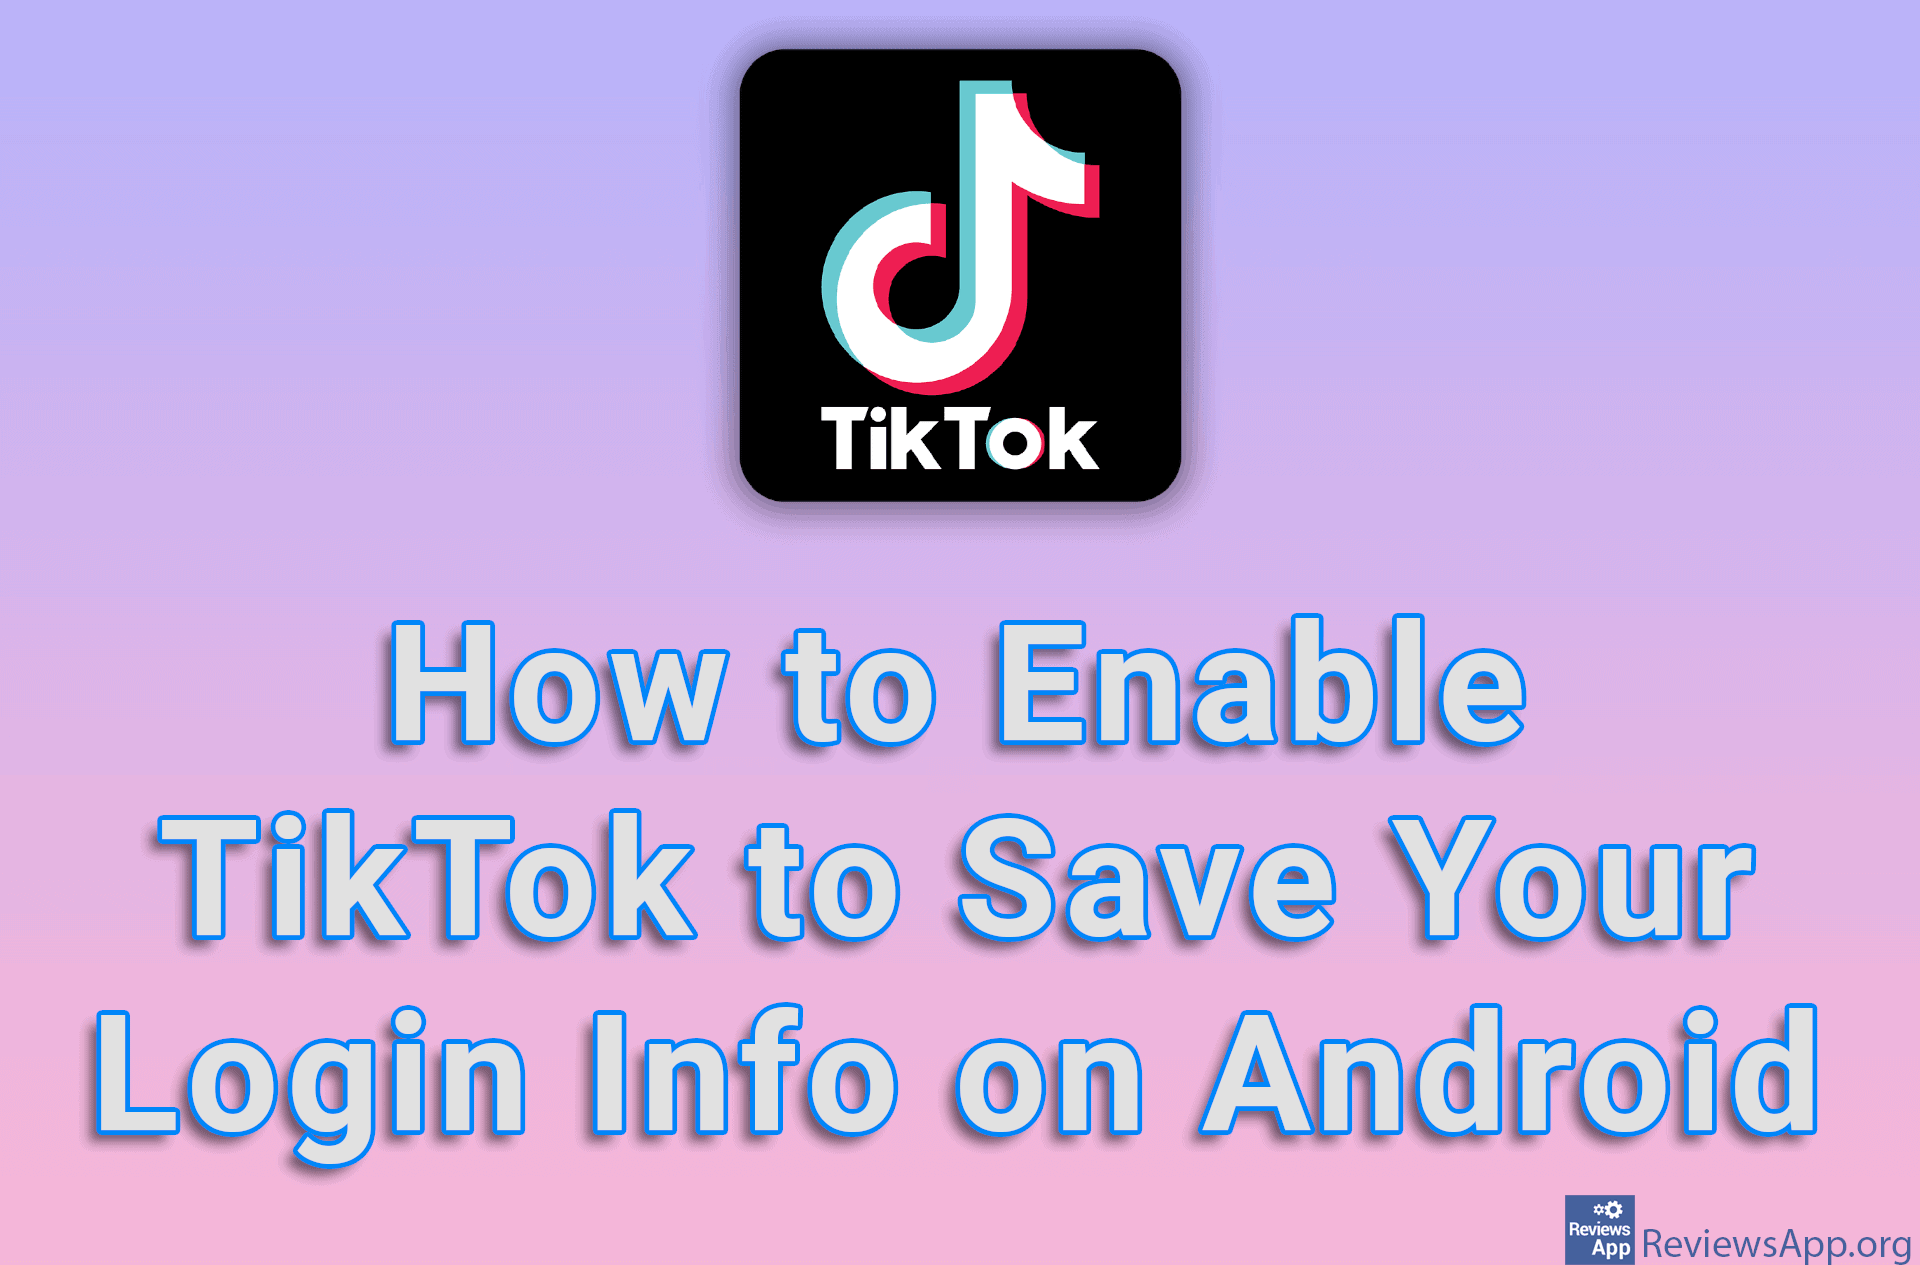 How to Enable TikTok to Save Your Login Info on Android